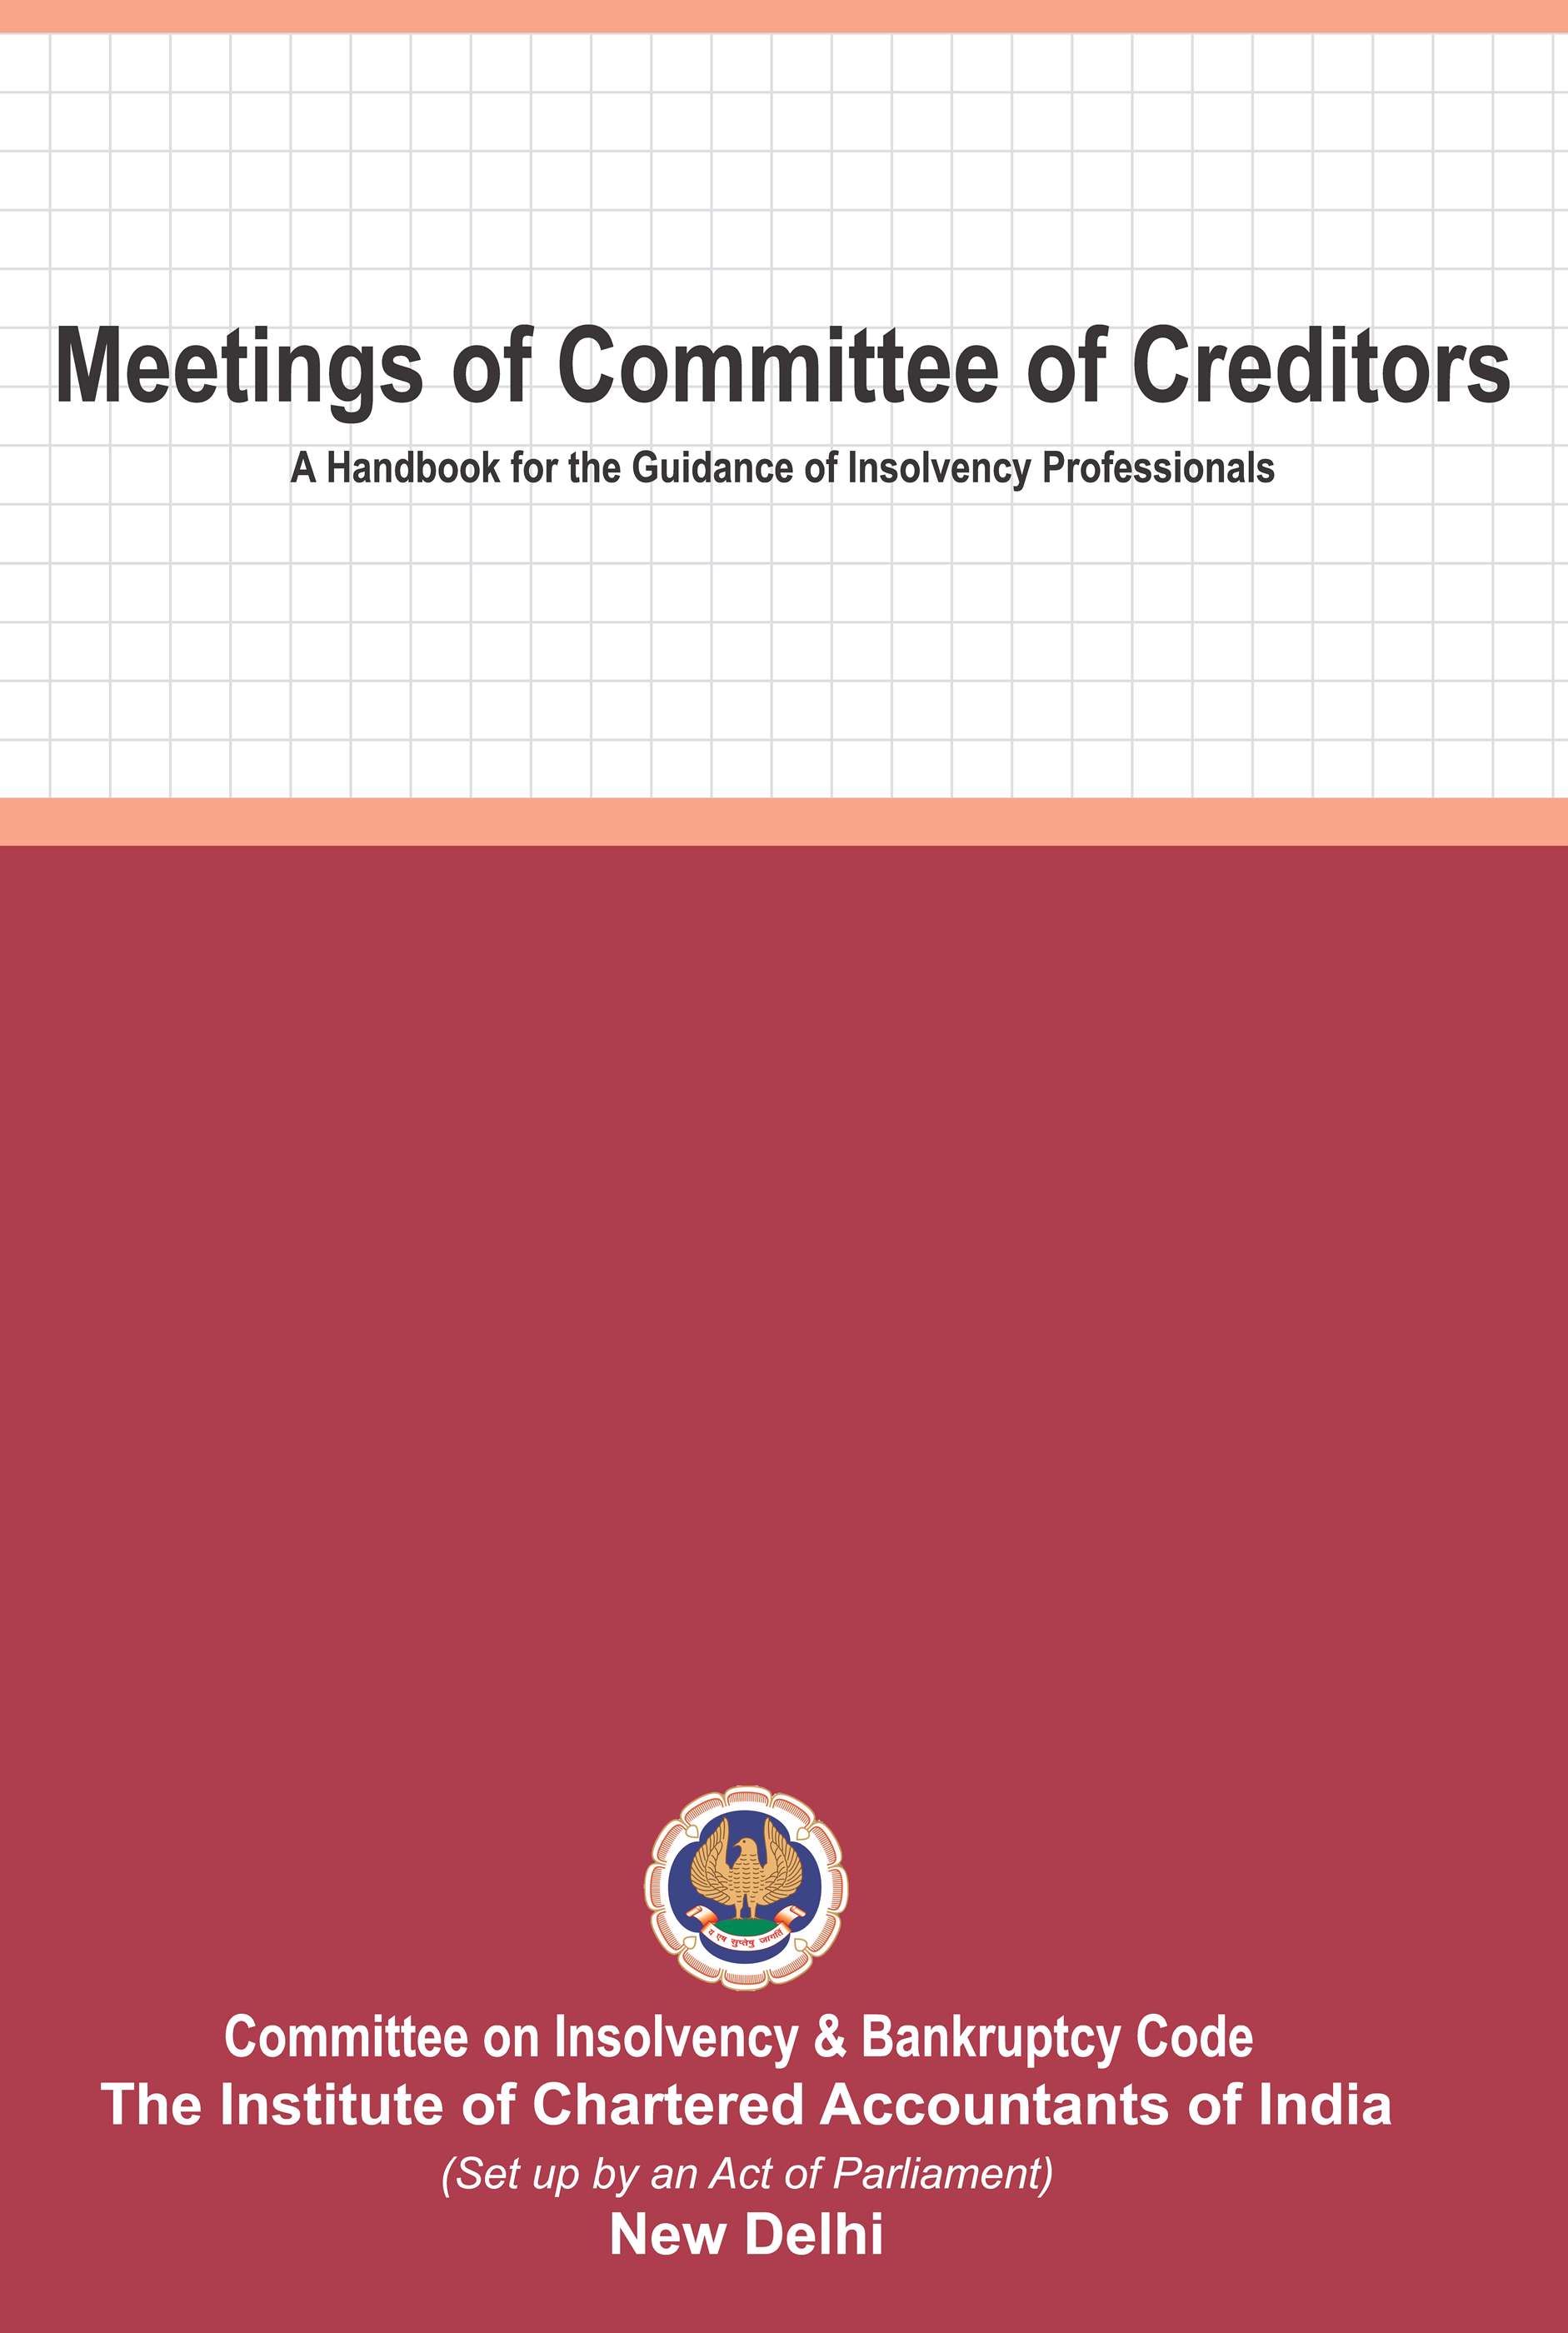 Meetings of Committee of Creditors - A Handbook for the Guidance of Insolvency Professionals - February, 2023